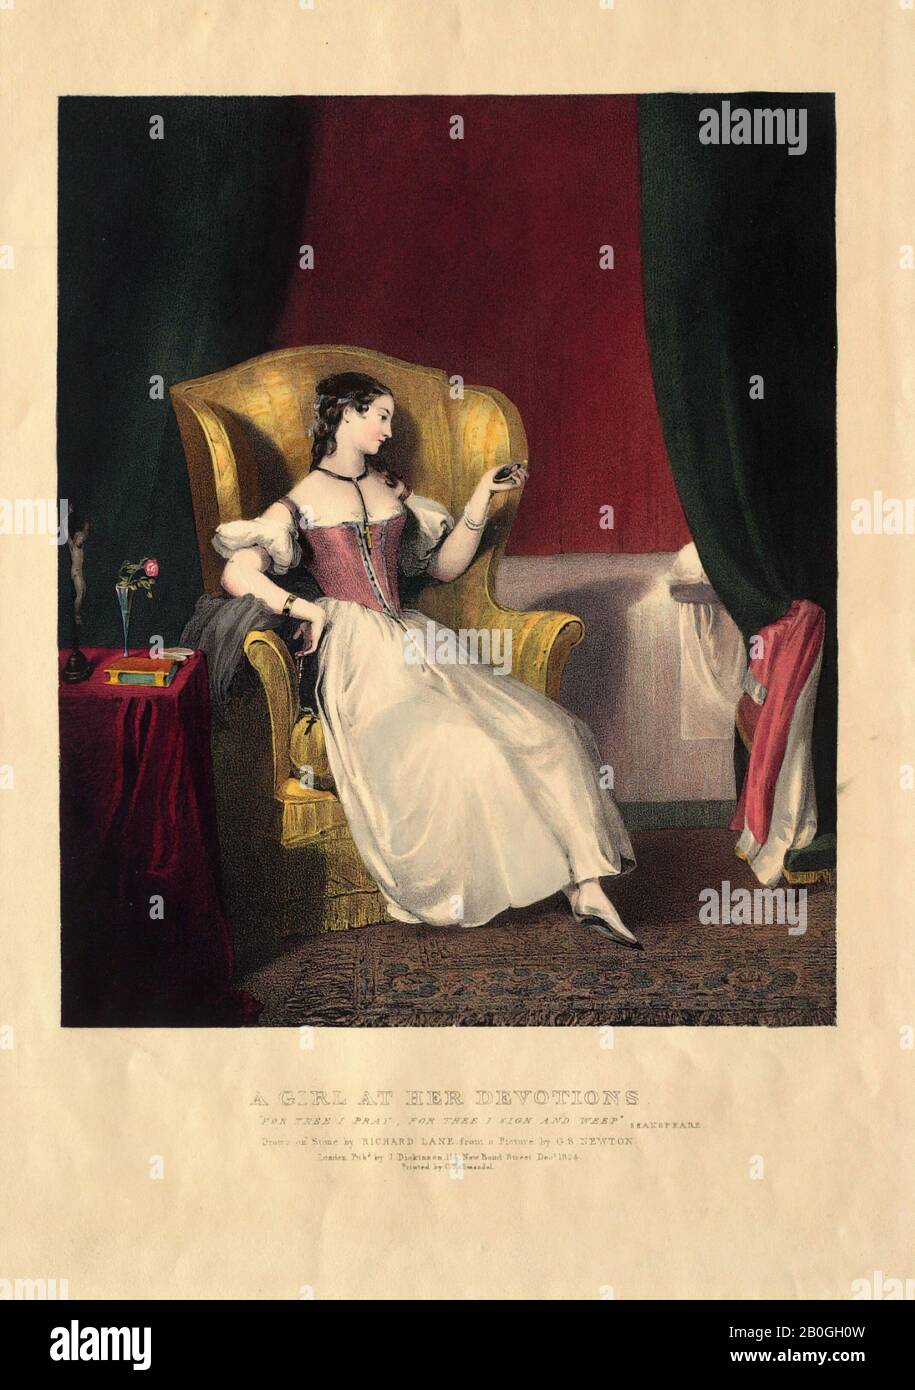 Richard James Lane, English, 1800–1872, After Gilbert Stuart Newton, (English, 1794–1835), A Girl at Her Devotions, 1824, Lithograph on paper, Overall: 9 11/16 x 8 1/8 in. (24.6 x 20.6 cm Stock Photo